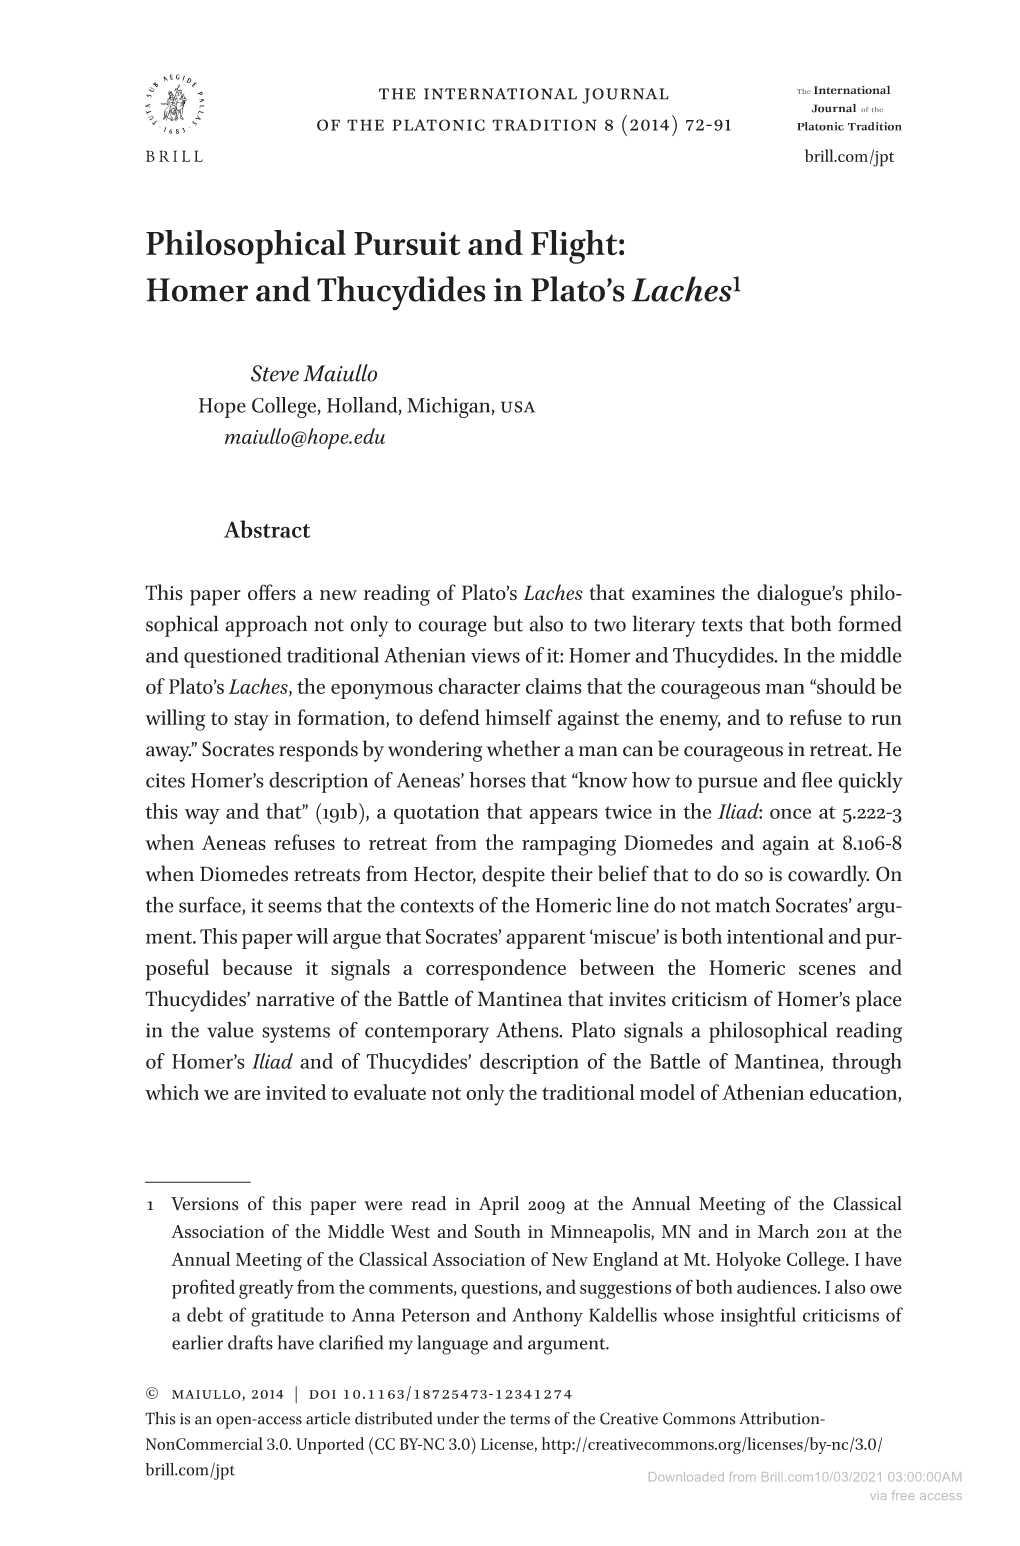 Philosophical Pursuit and Flight: Homer and Thucydides in Plato's